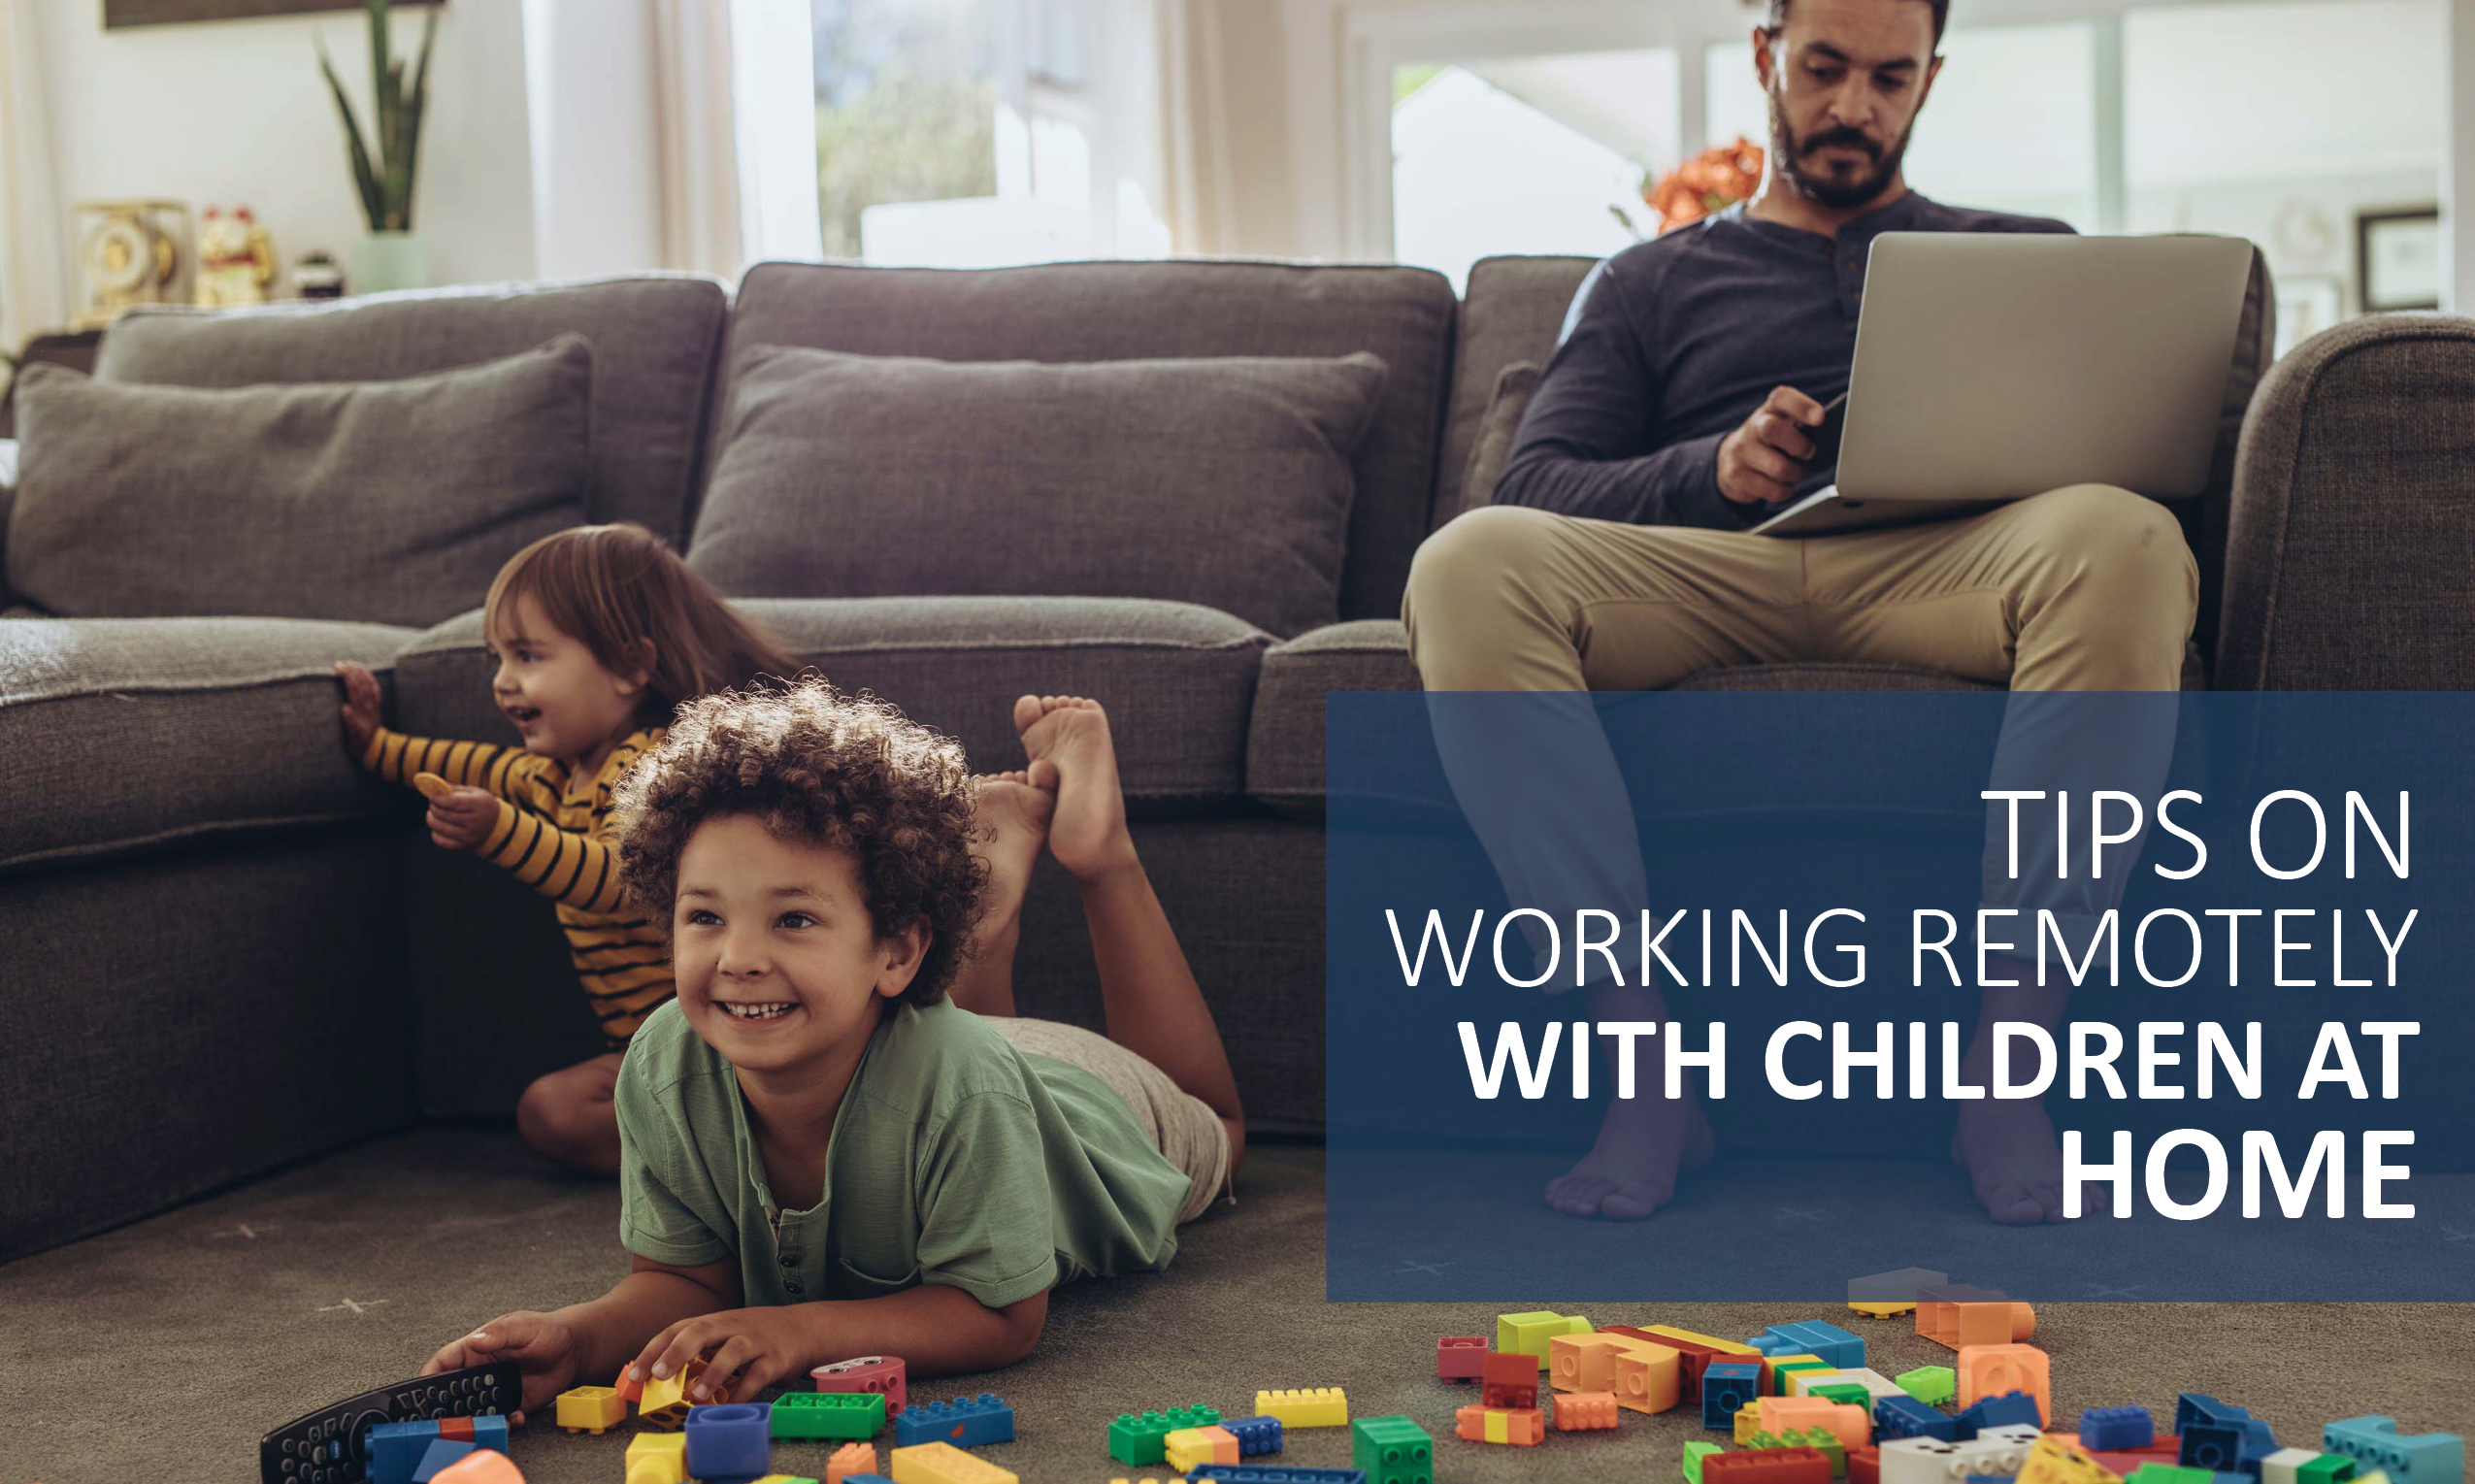 tips-on-working-remotely-with-children-at-home_Southern Cross